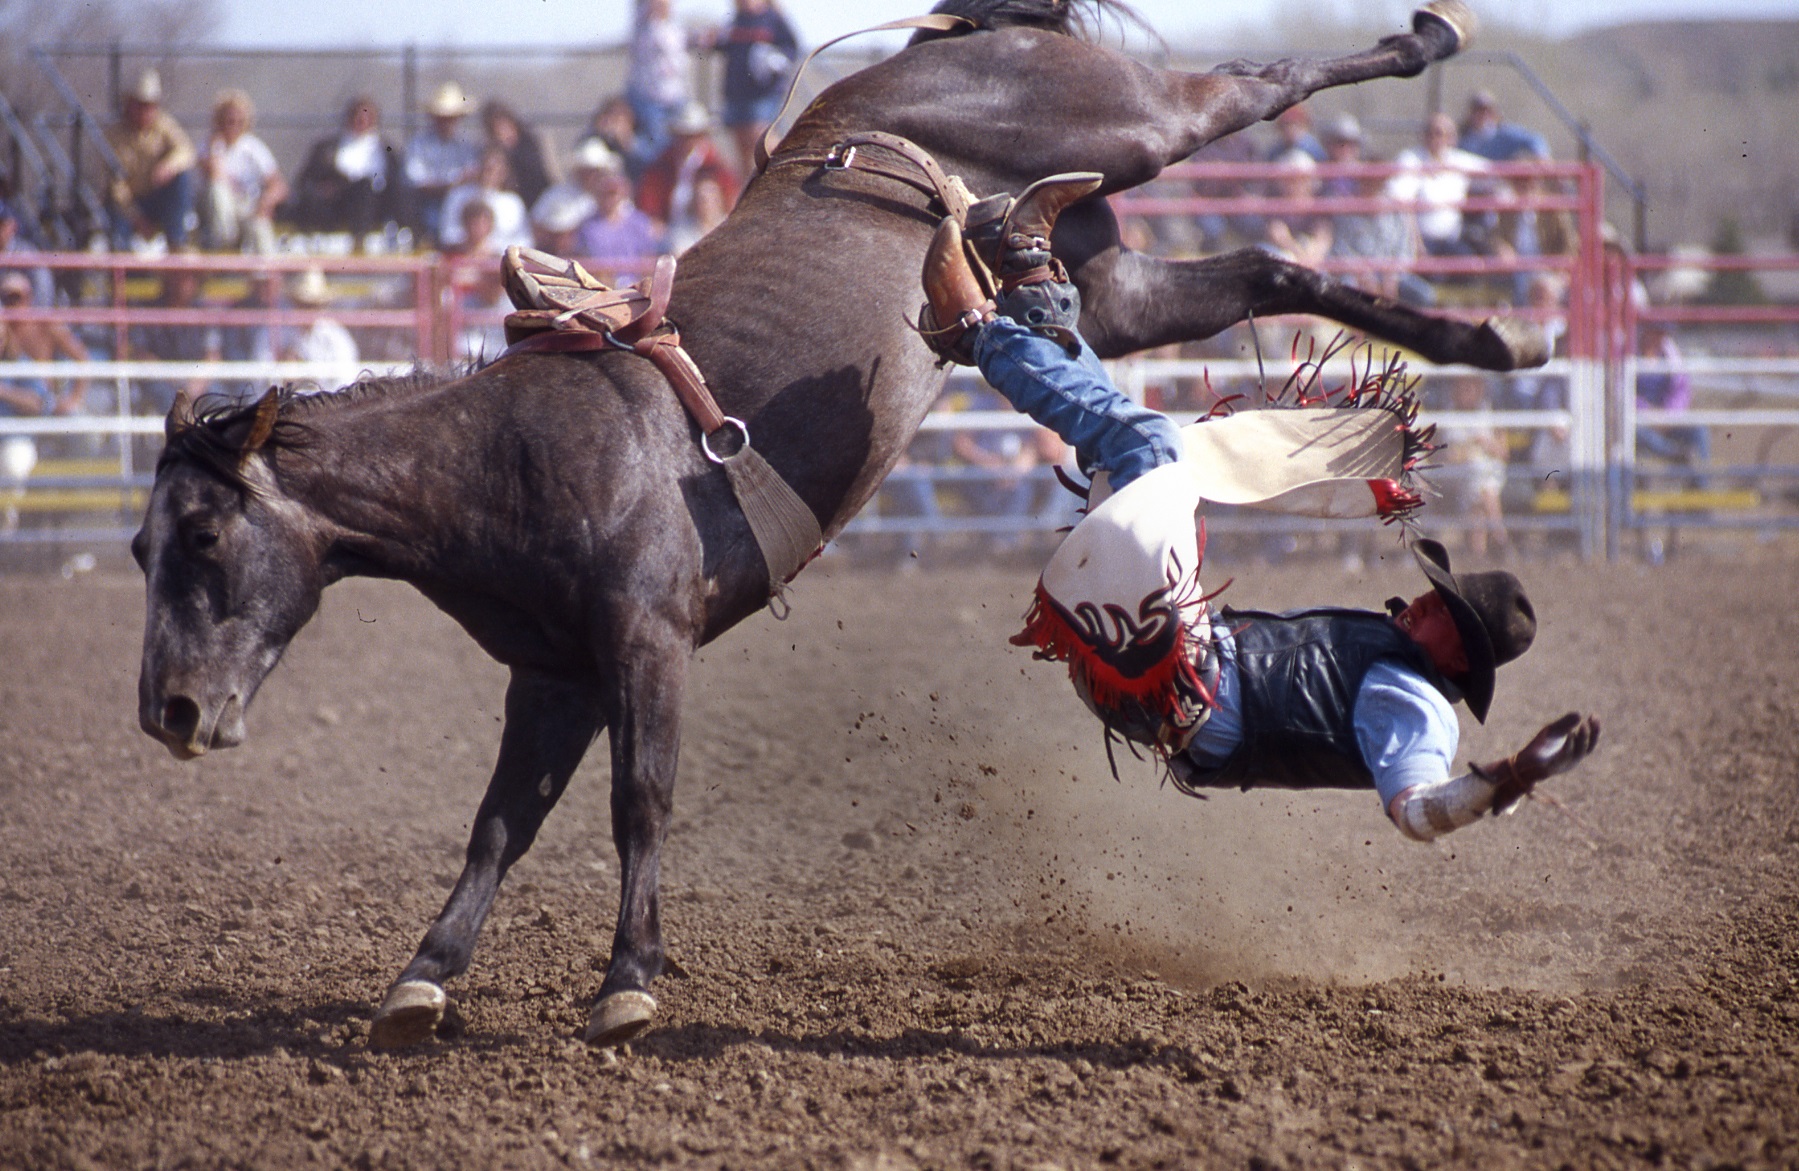 Rodeo romp at Miles City Bucking Horse sale